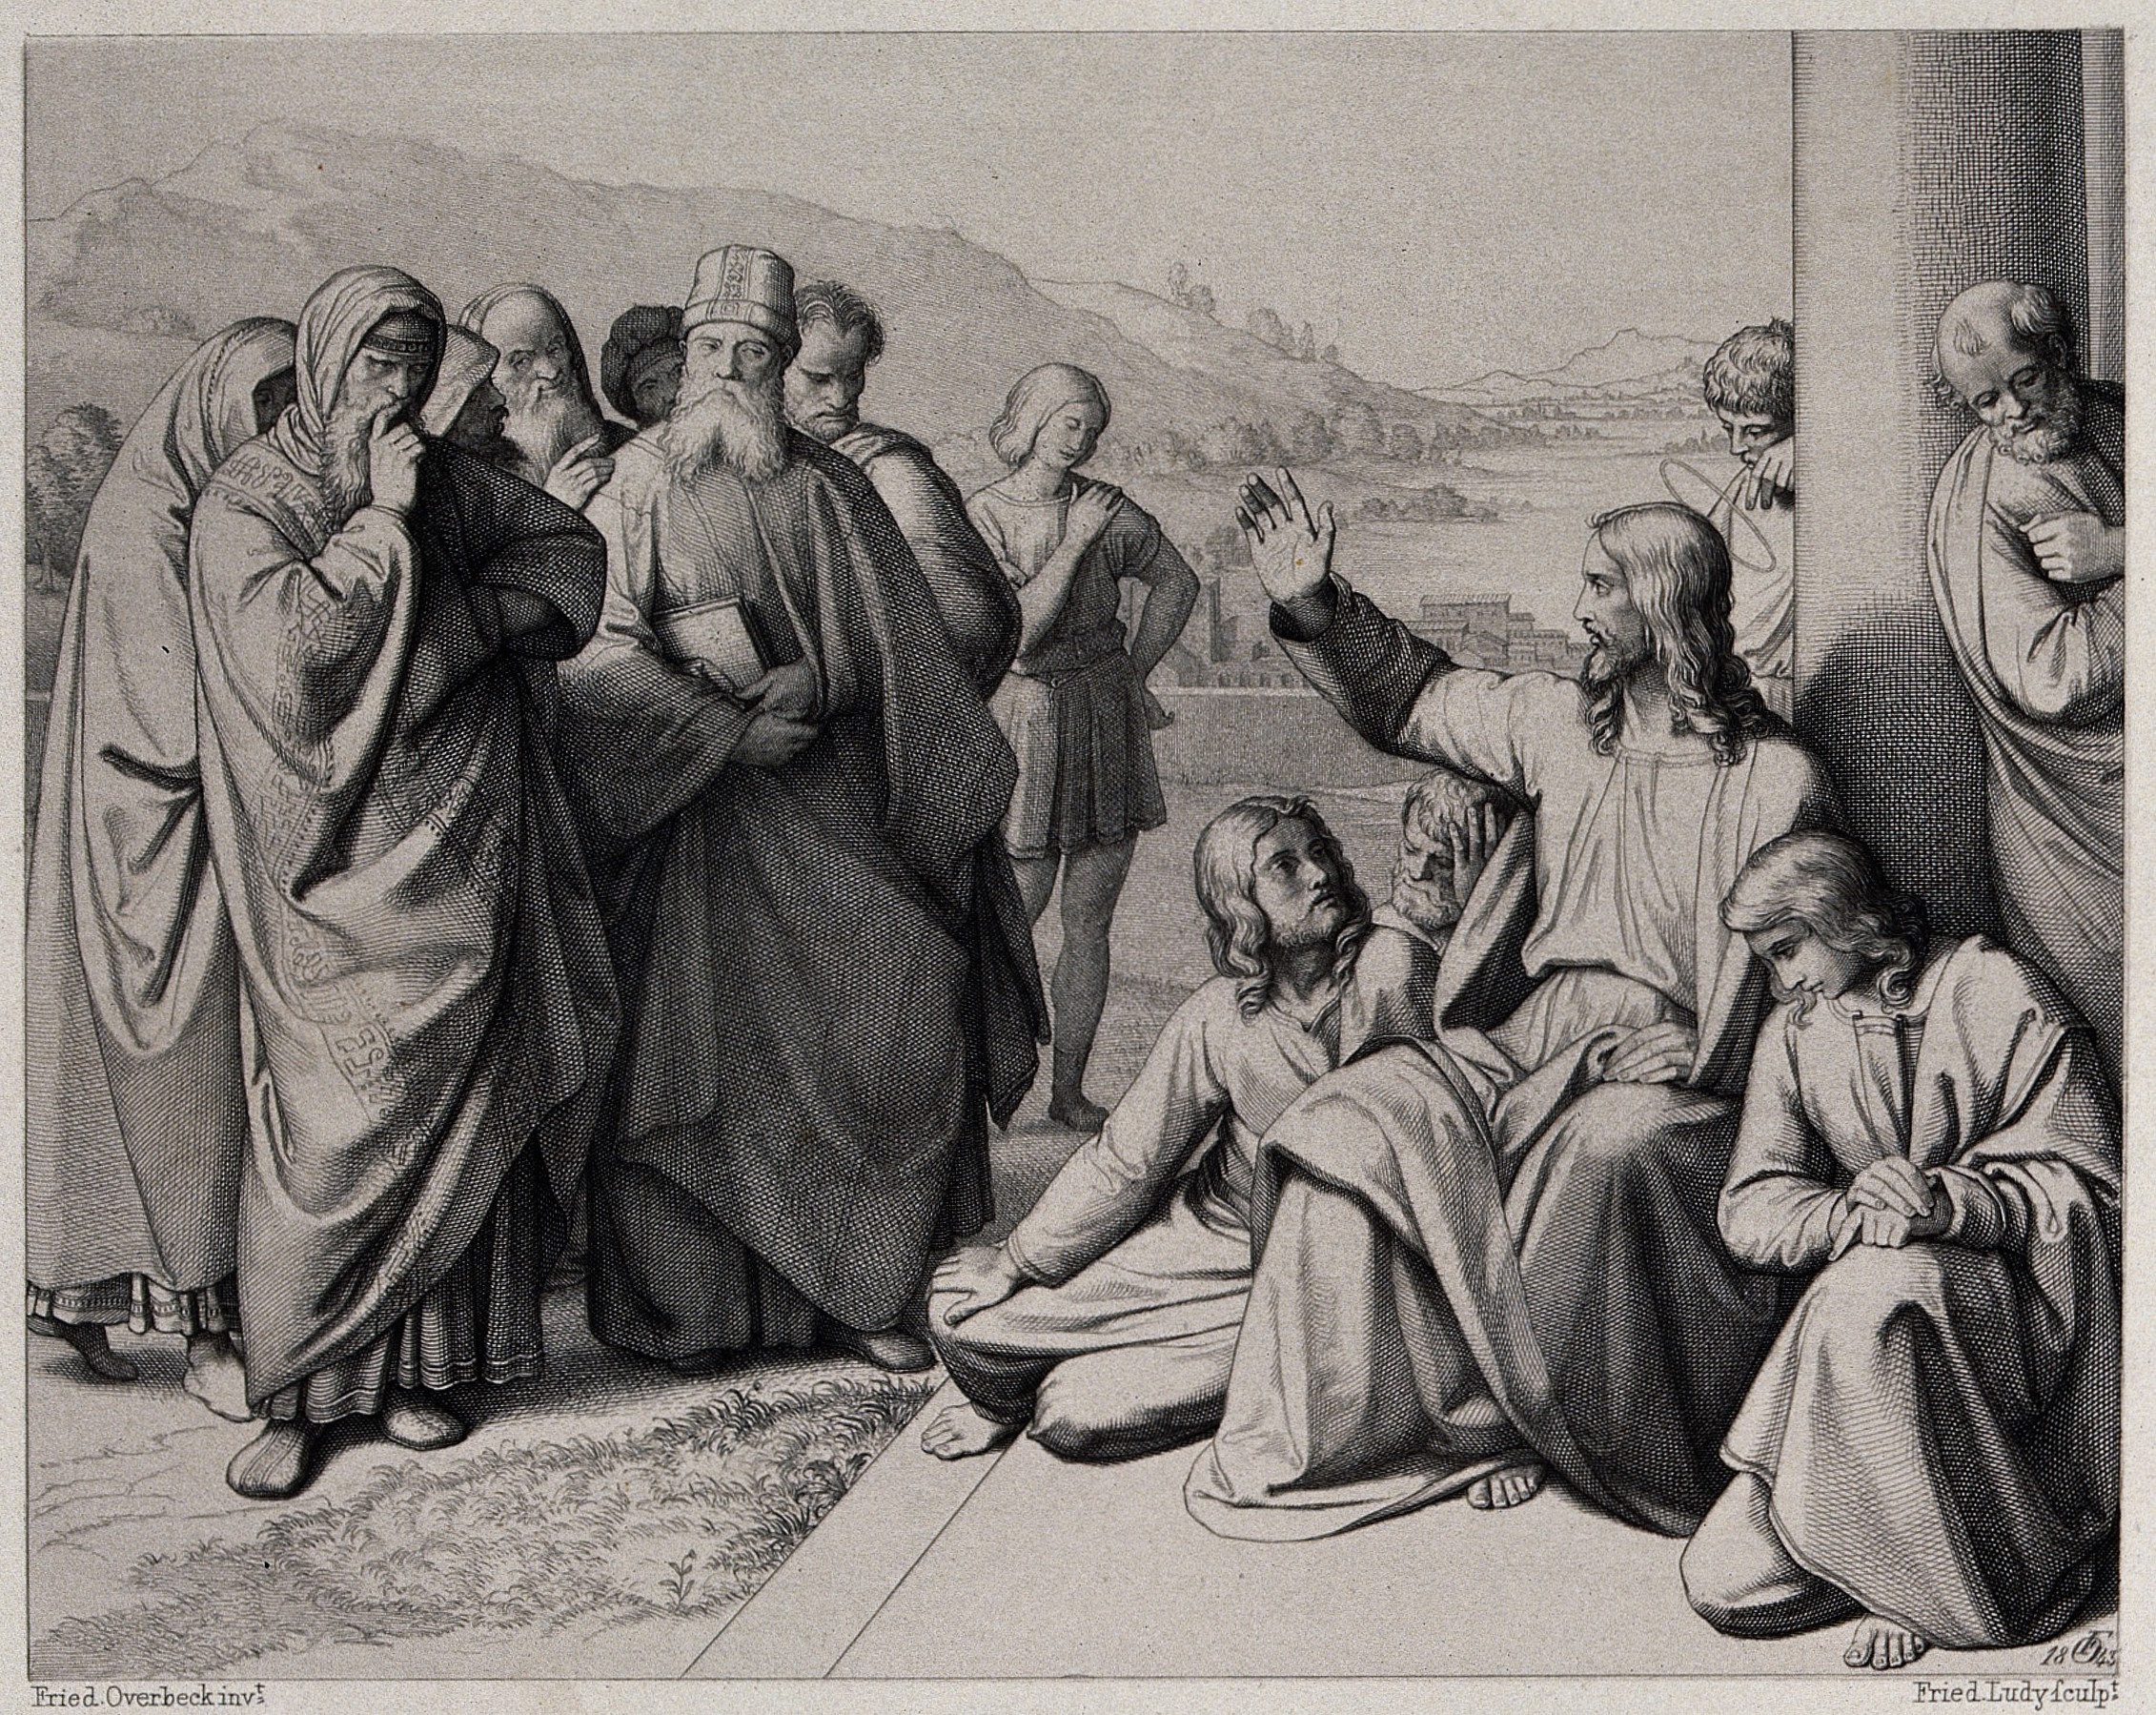 V0034553 Christ curses the Pharisees. Etching by F.A. Ludy after J.F.